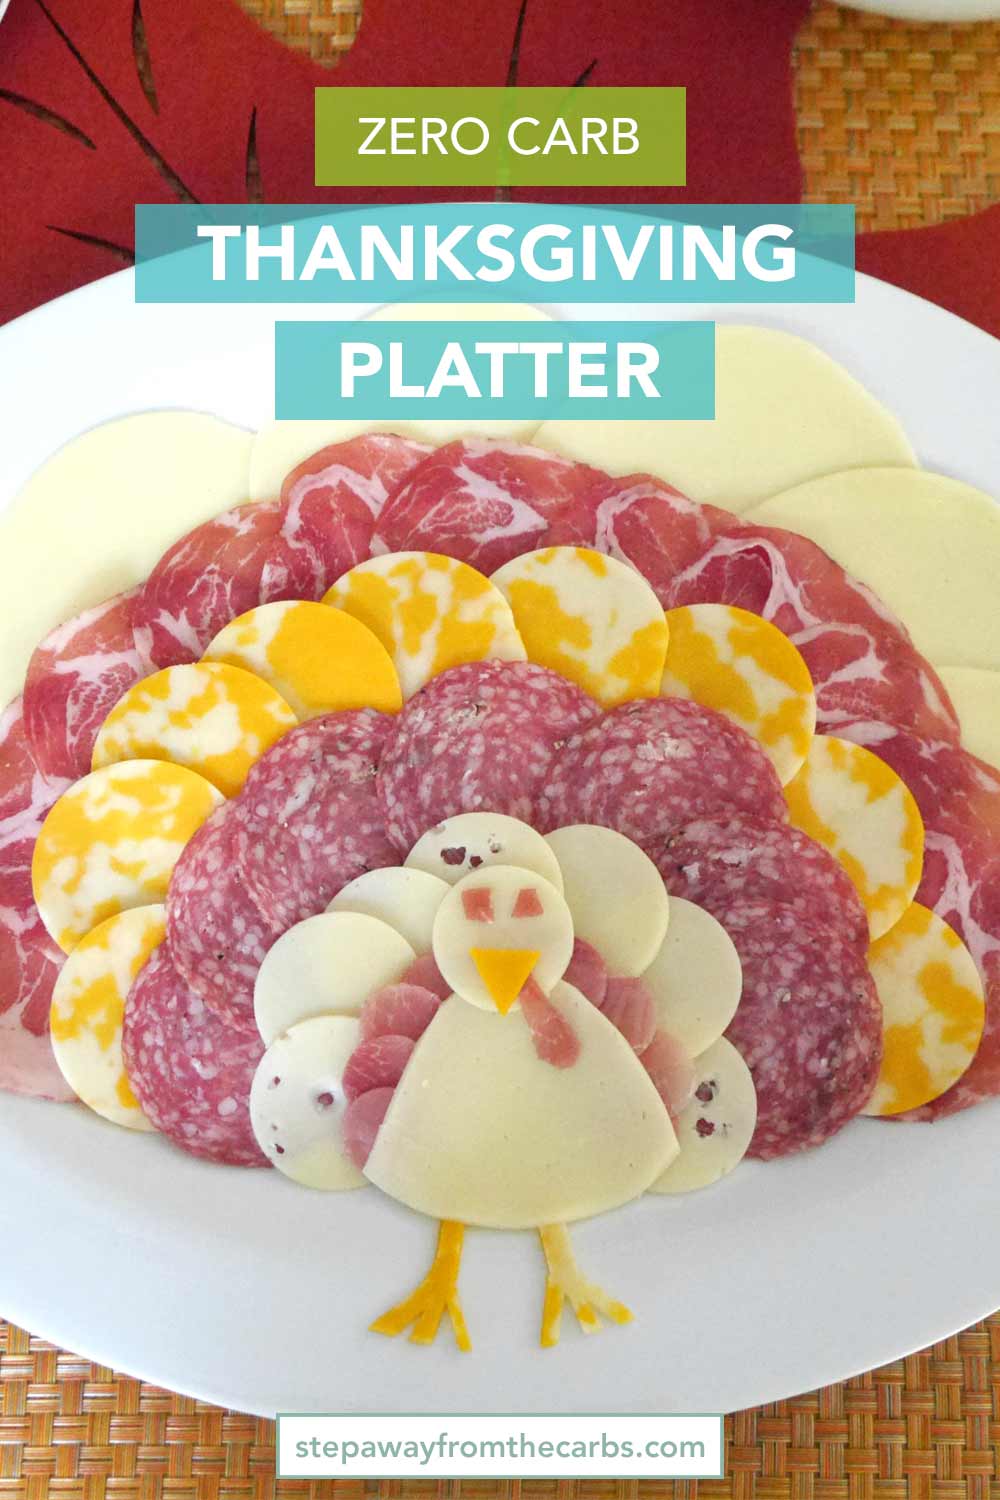 Zero Carb Thanksgiving Platter - a fun dish that all your friends and family will enjoy!